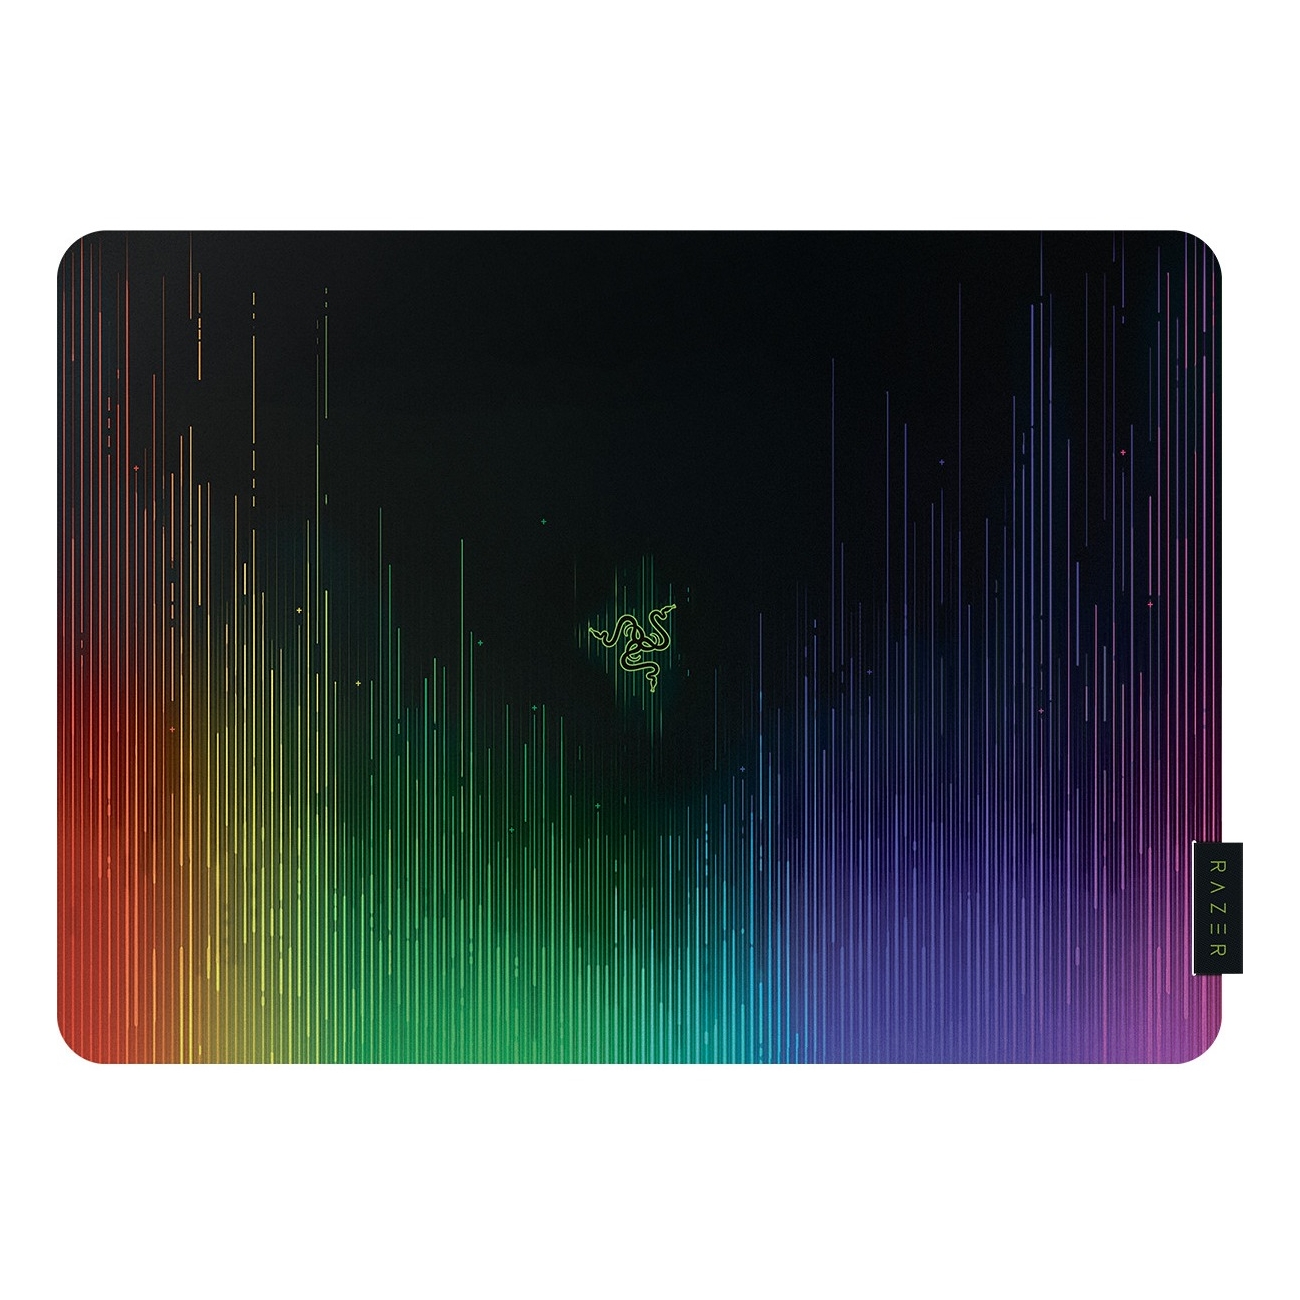 Razer Sphex V2 Ultra-Thin Form Factor - Optimized Gaming Surface - Polycarbonate Finish - Gaming Mouse Mat - image 3 of 10